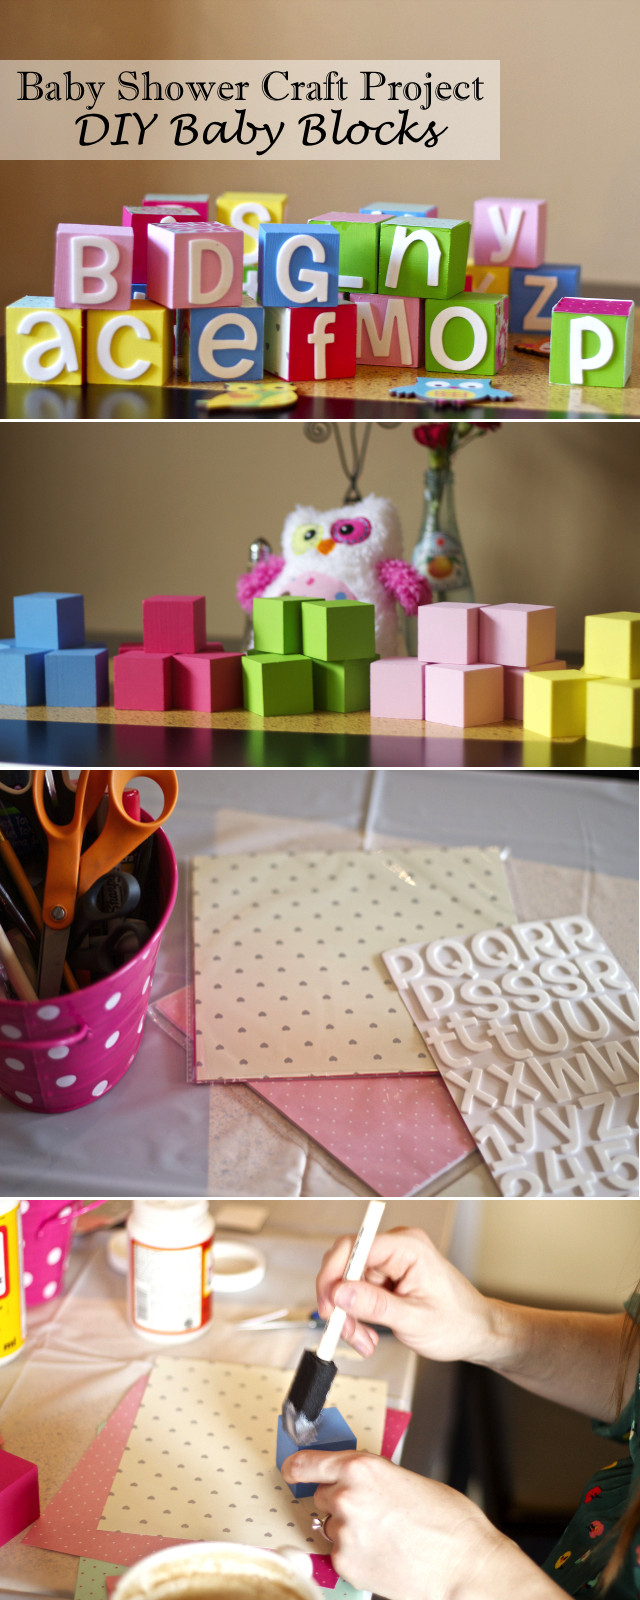 DIY Baby Blocks For Baby Shower
 Baby Shower Baby Blocks s and for